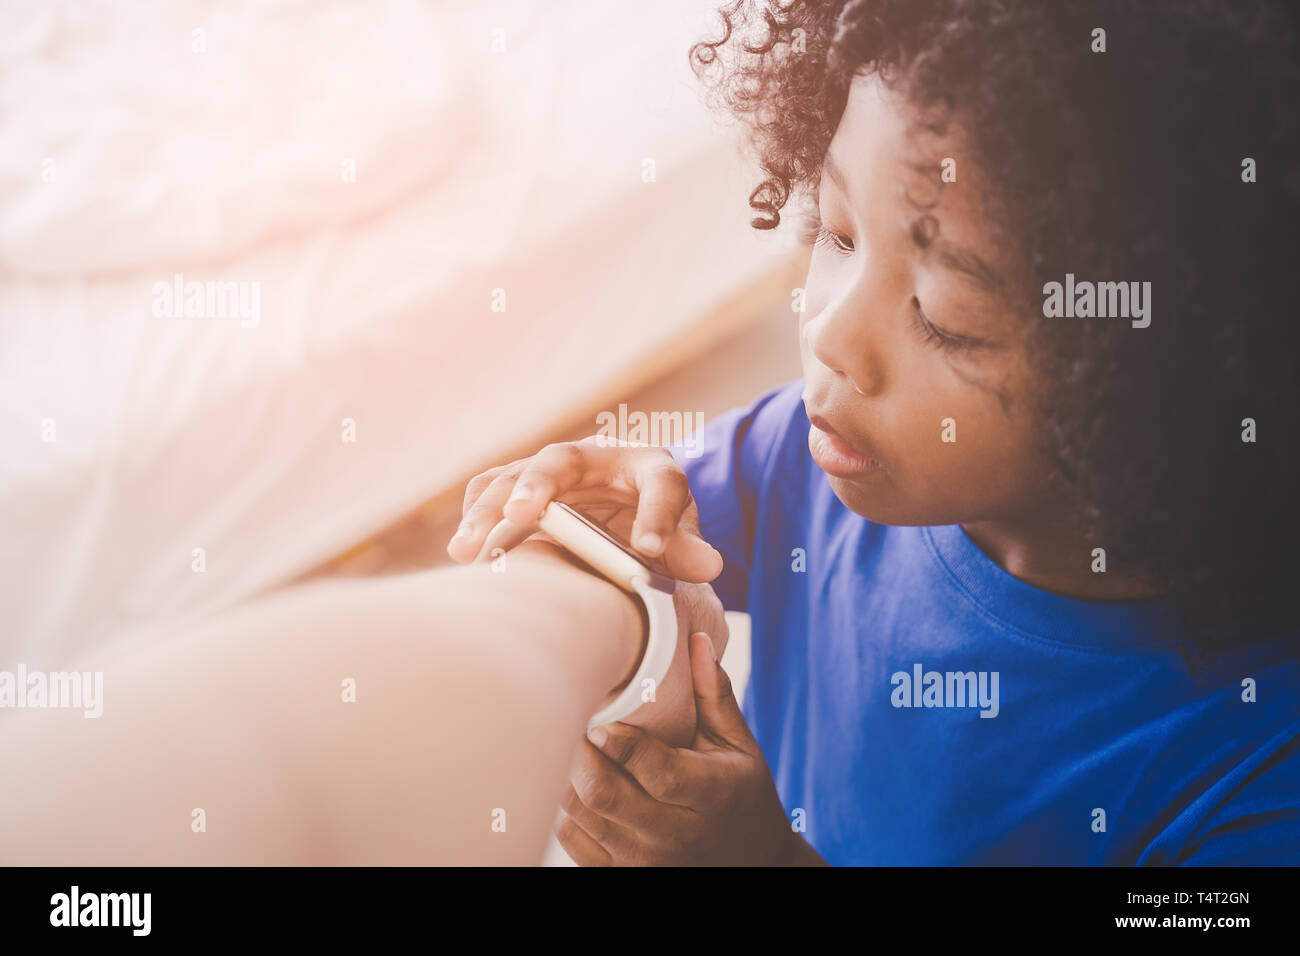 Little boy is playing with smart watch on a man wrist Stock Photo